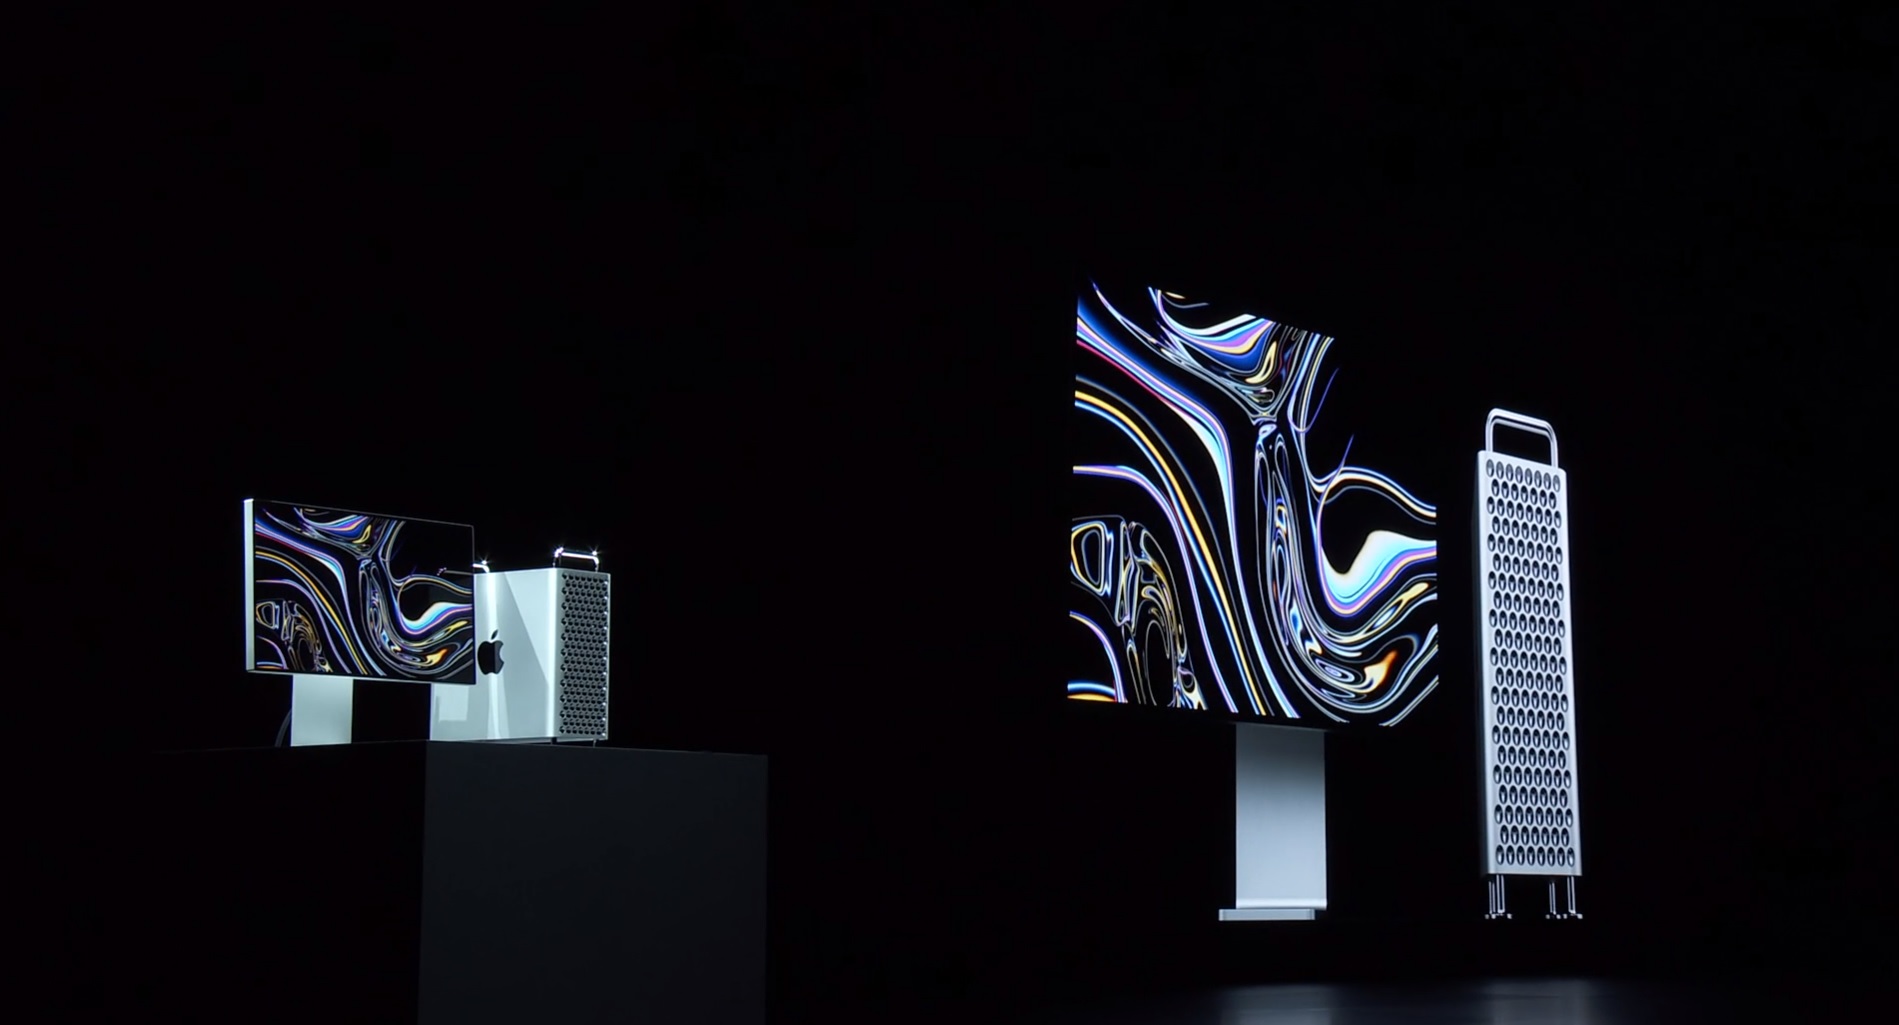 The new Mac Pro shown at Apple WWDC 2019.